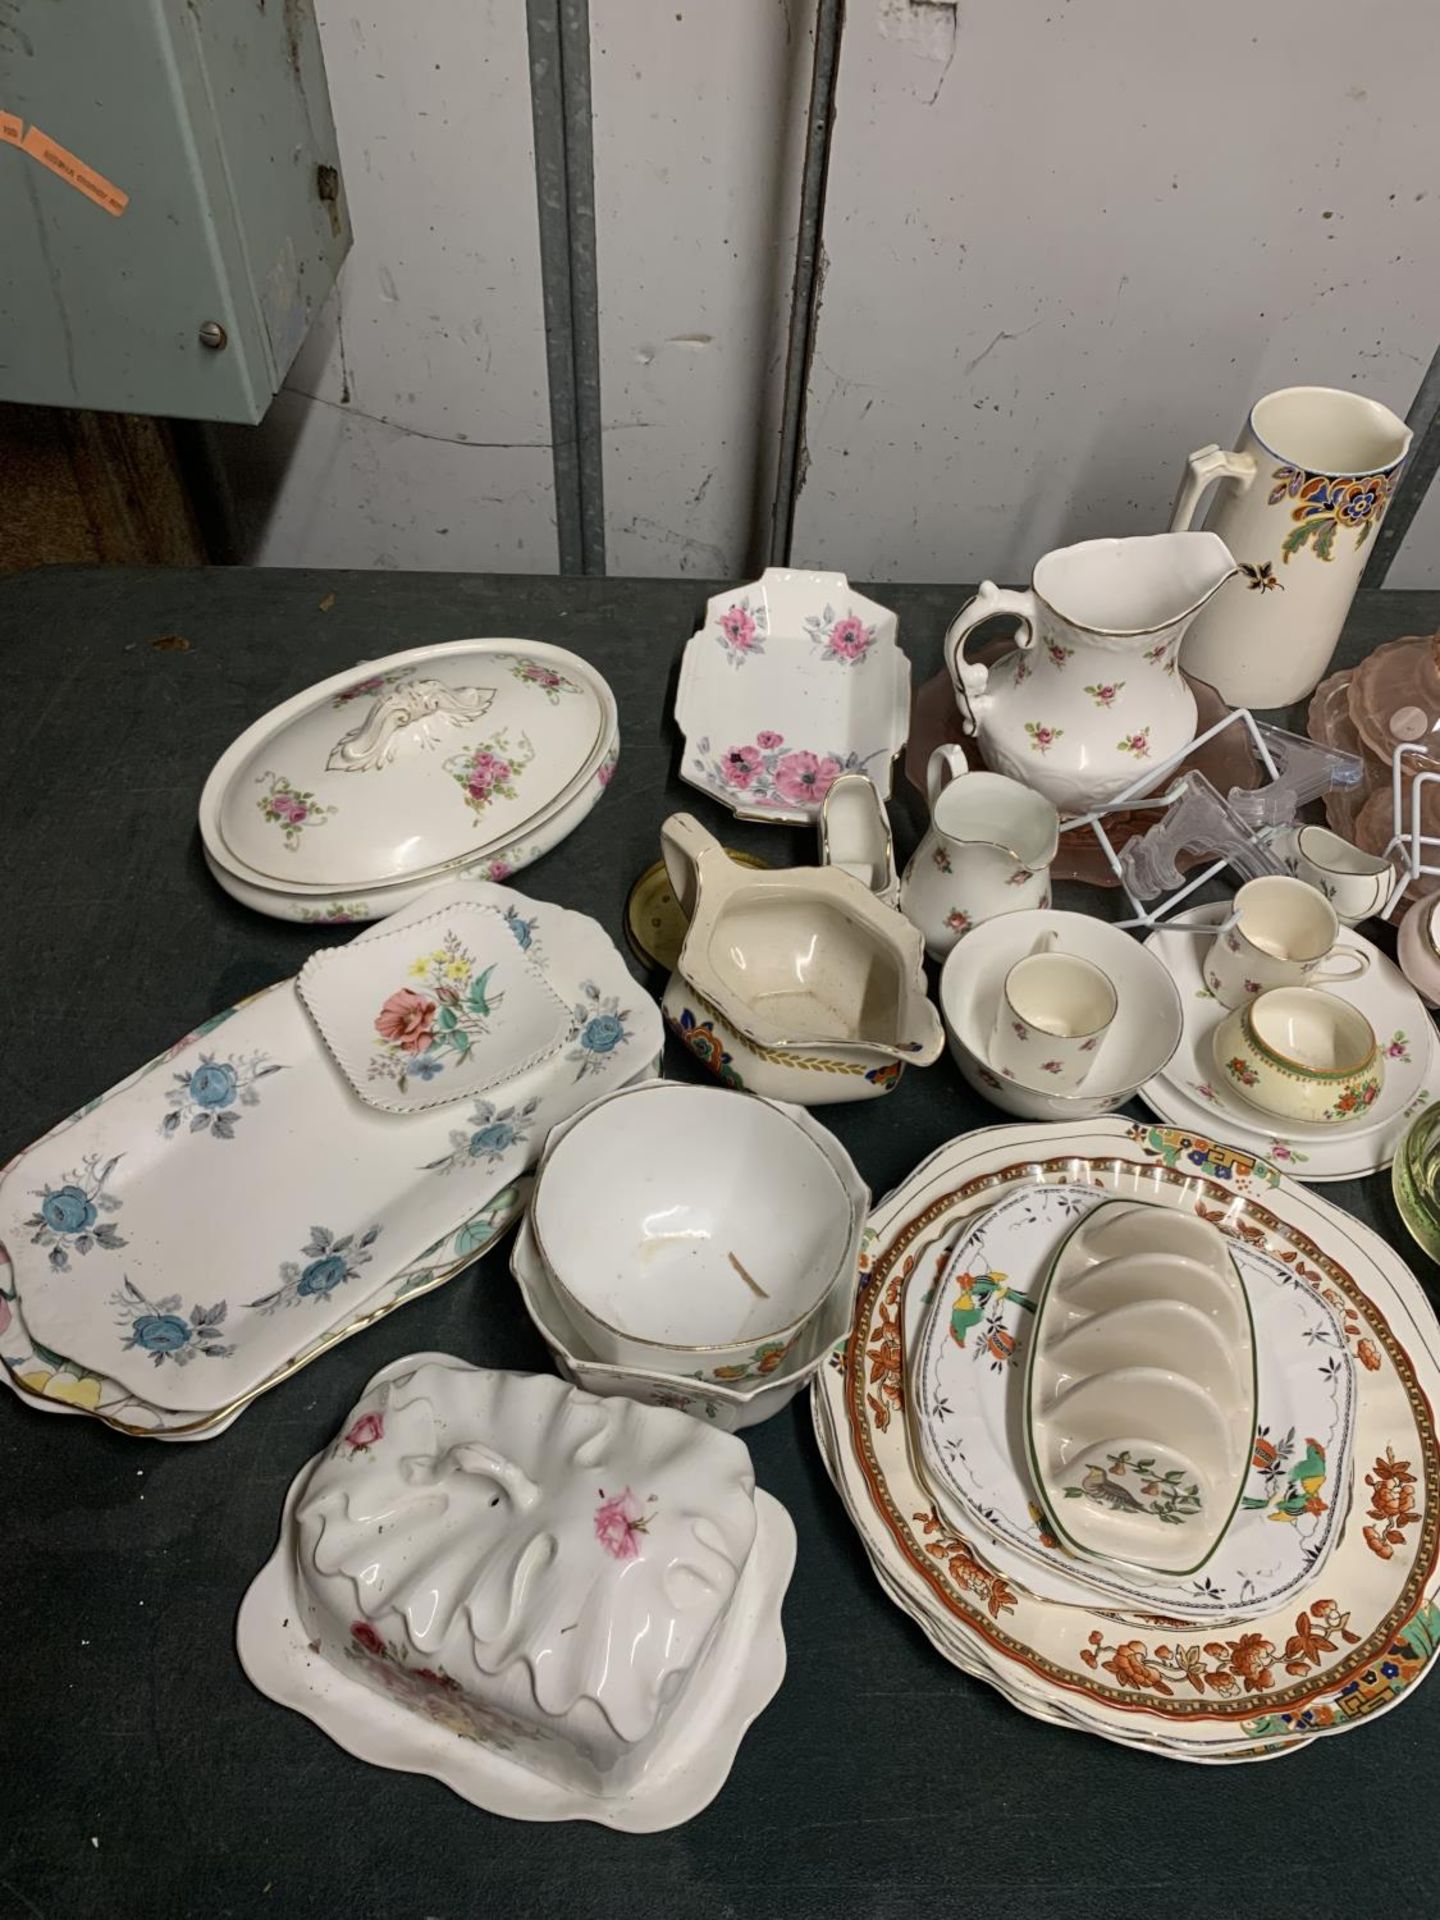 A LARGE QUANTITY OF CERAMICS AND GLASSWARE - Image 2 of 10